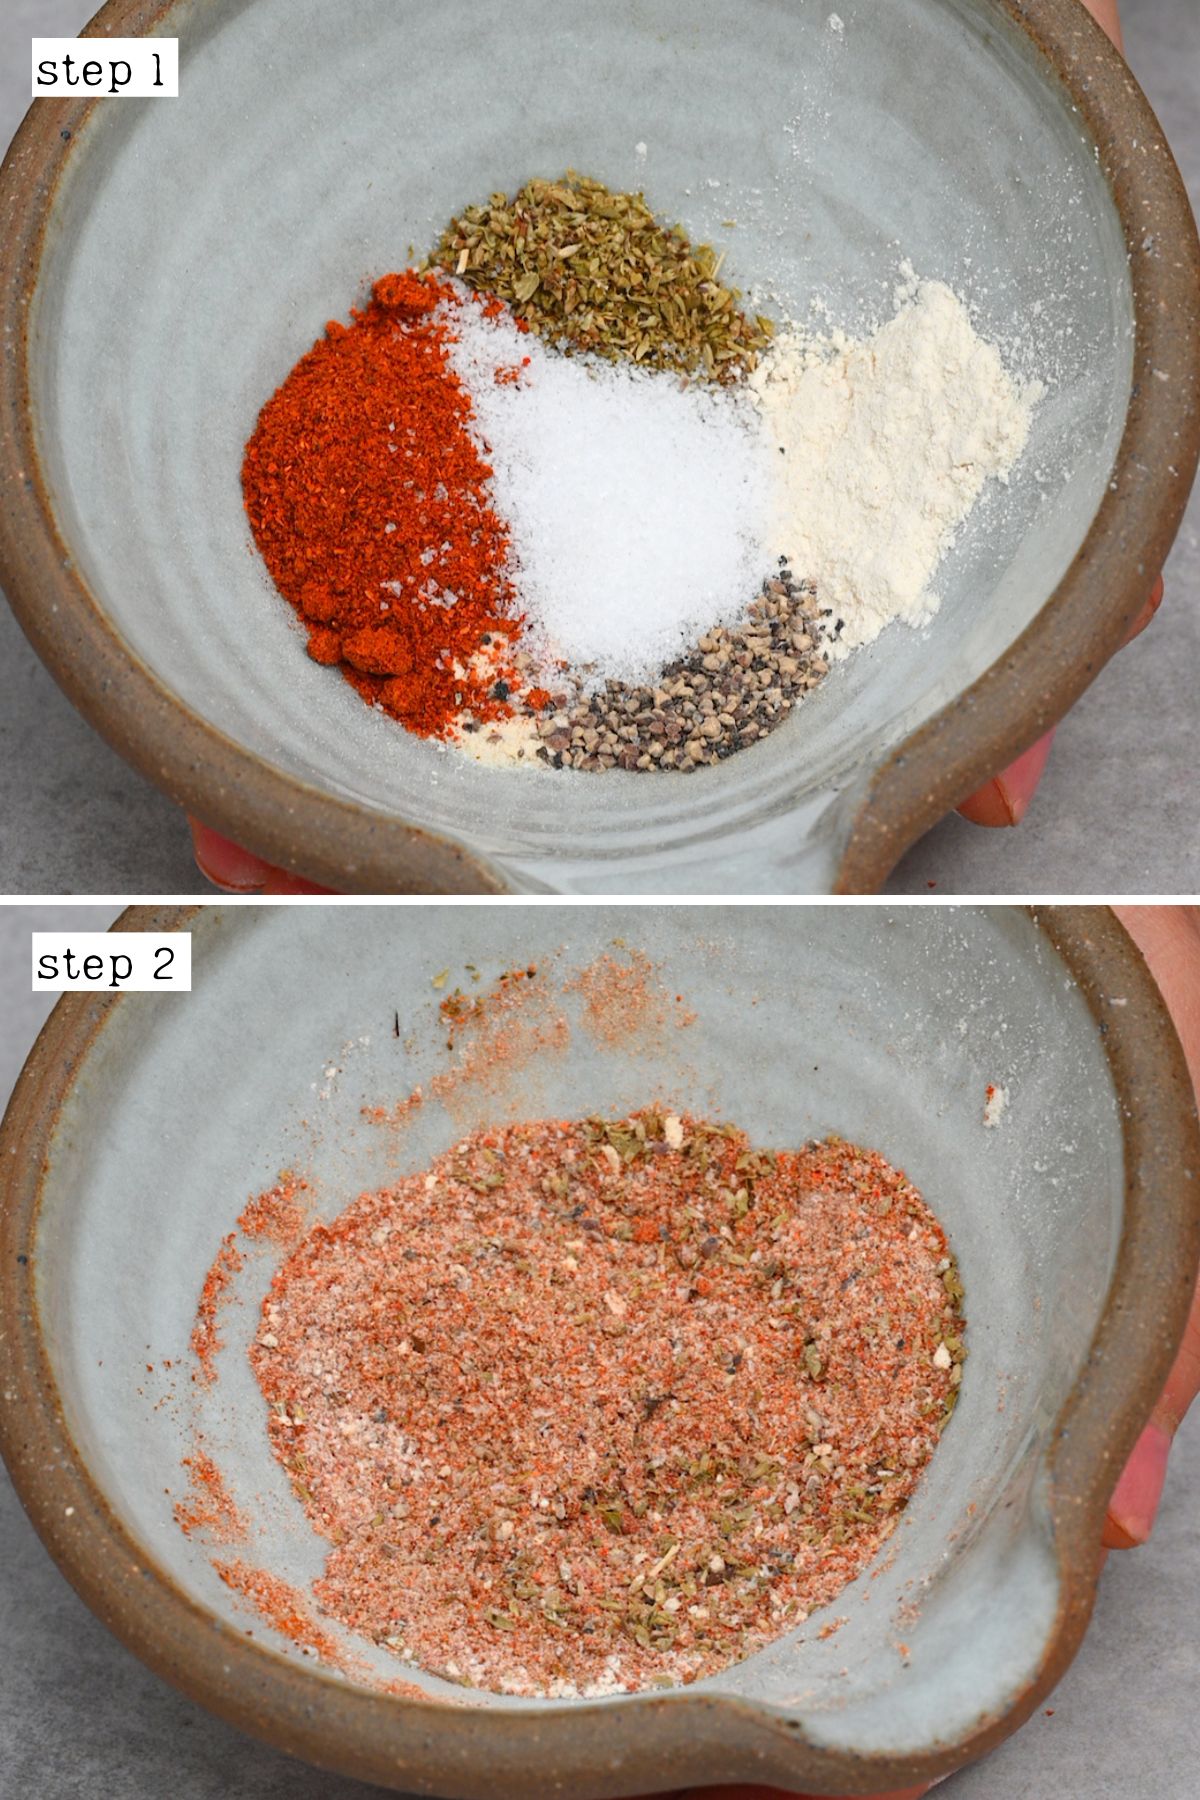 Steps for mixing spices for tacos